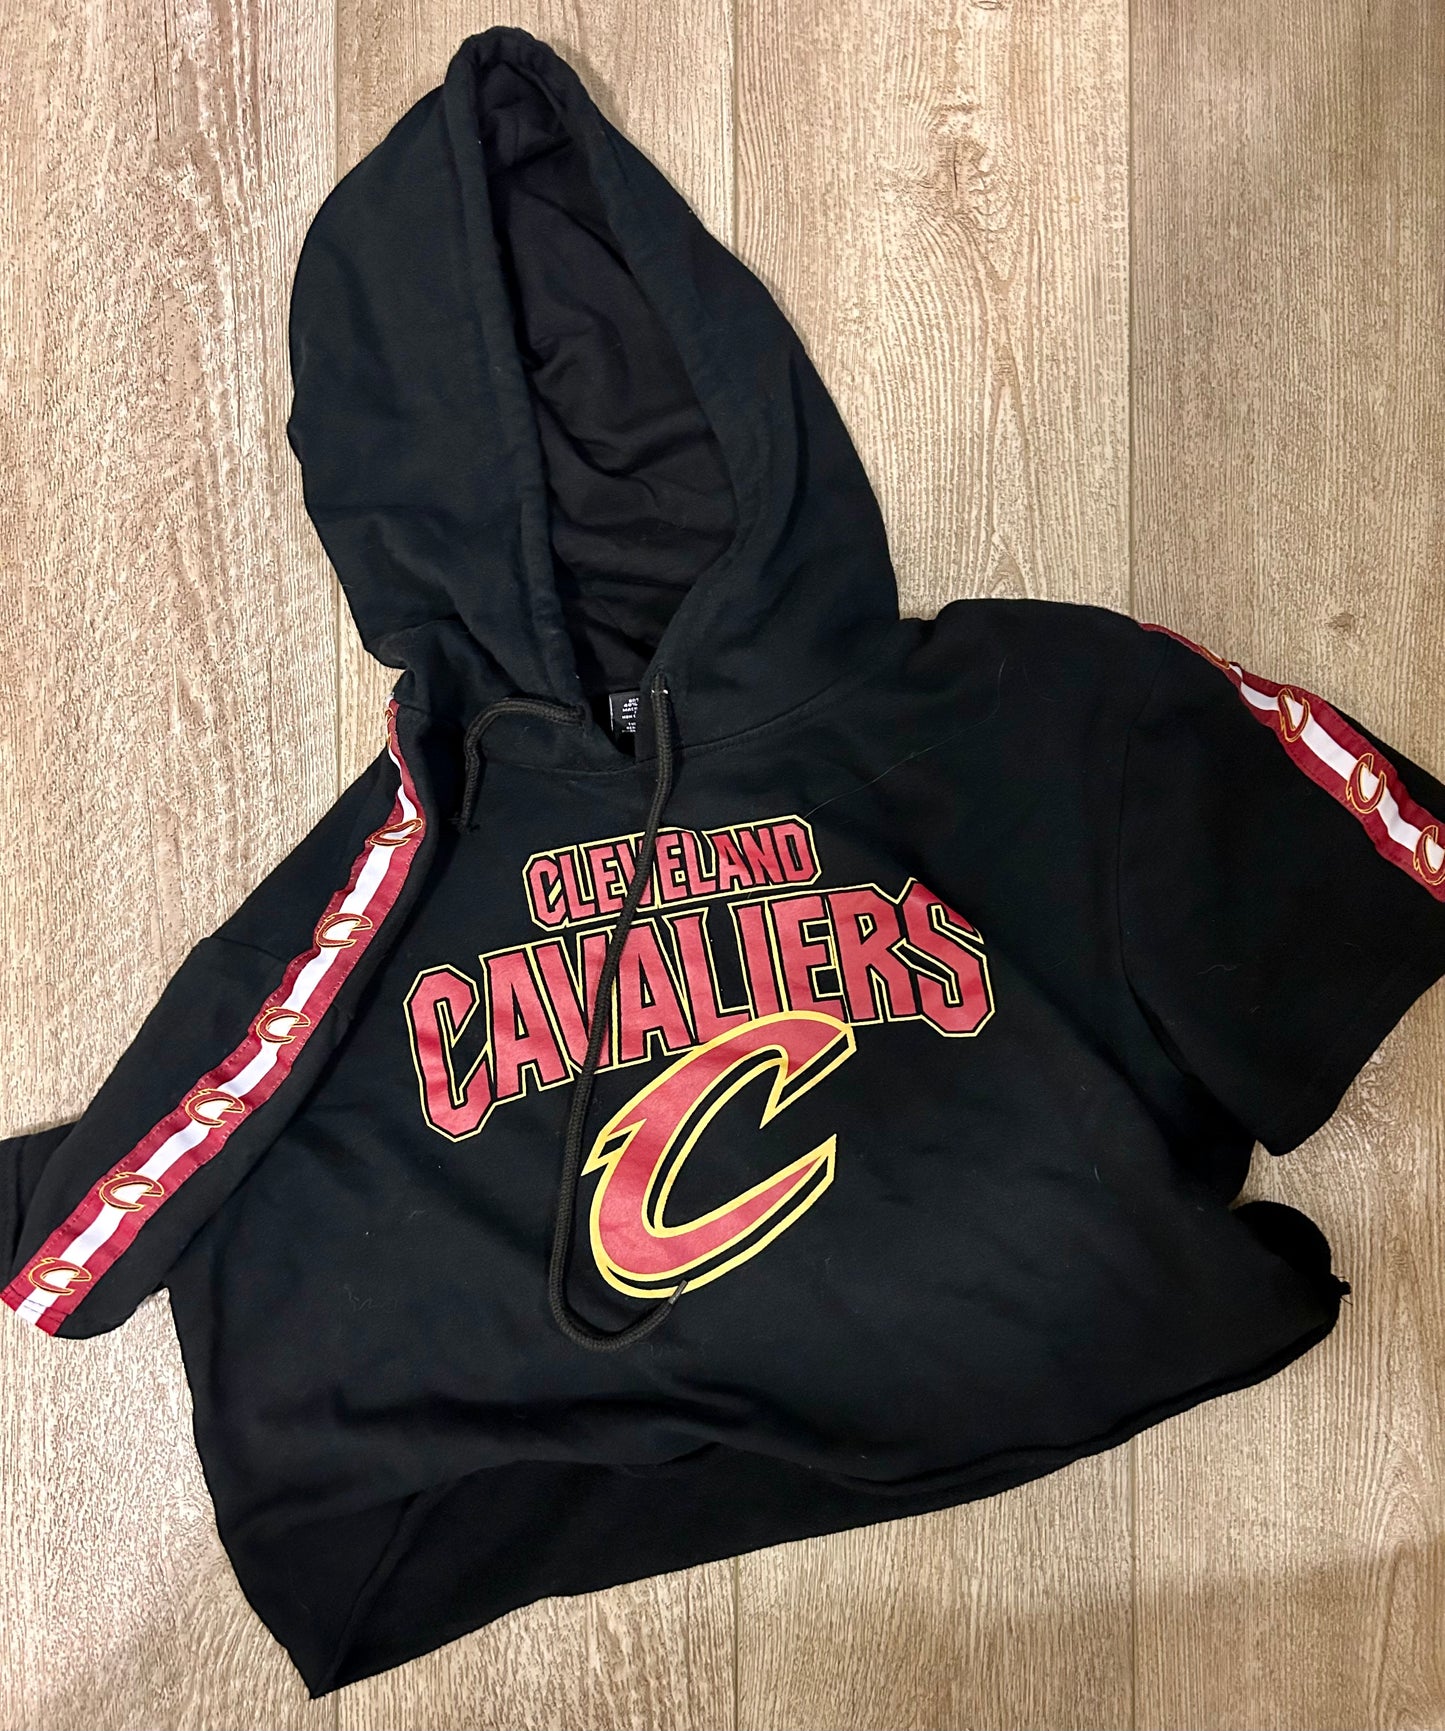 Girls Youth 10/12 Cropped Cavs Hoodie